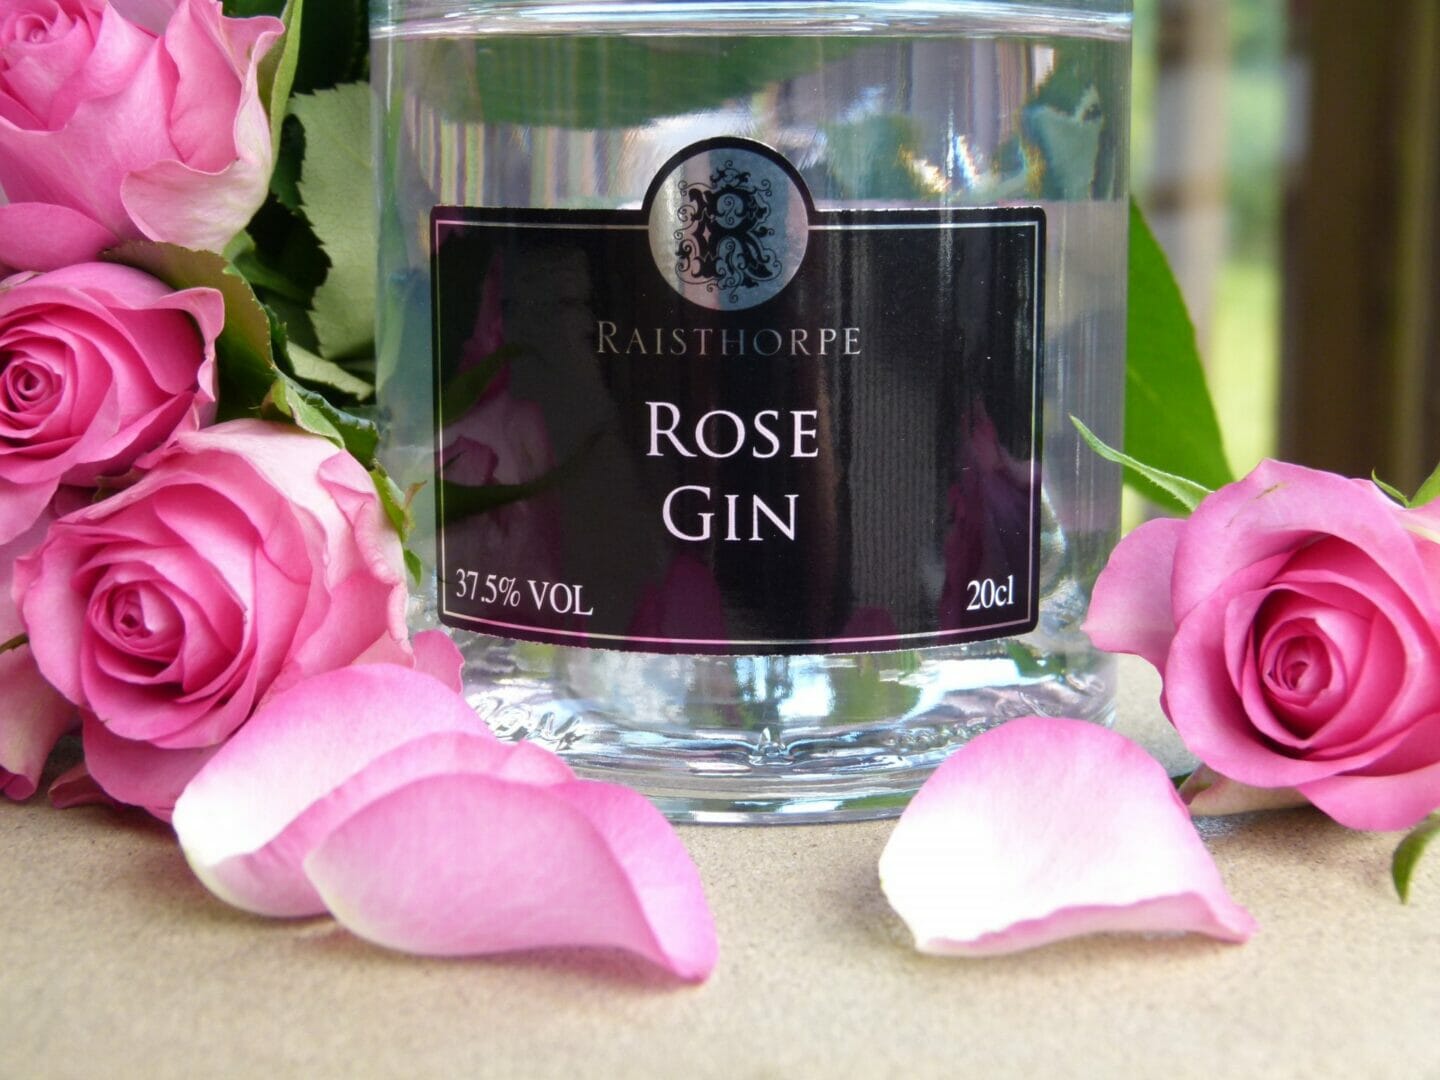 RAISE A TOAST TO YORKSHIRE DAY WITH NEW ROSE GIN